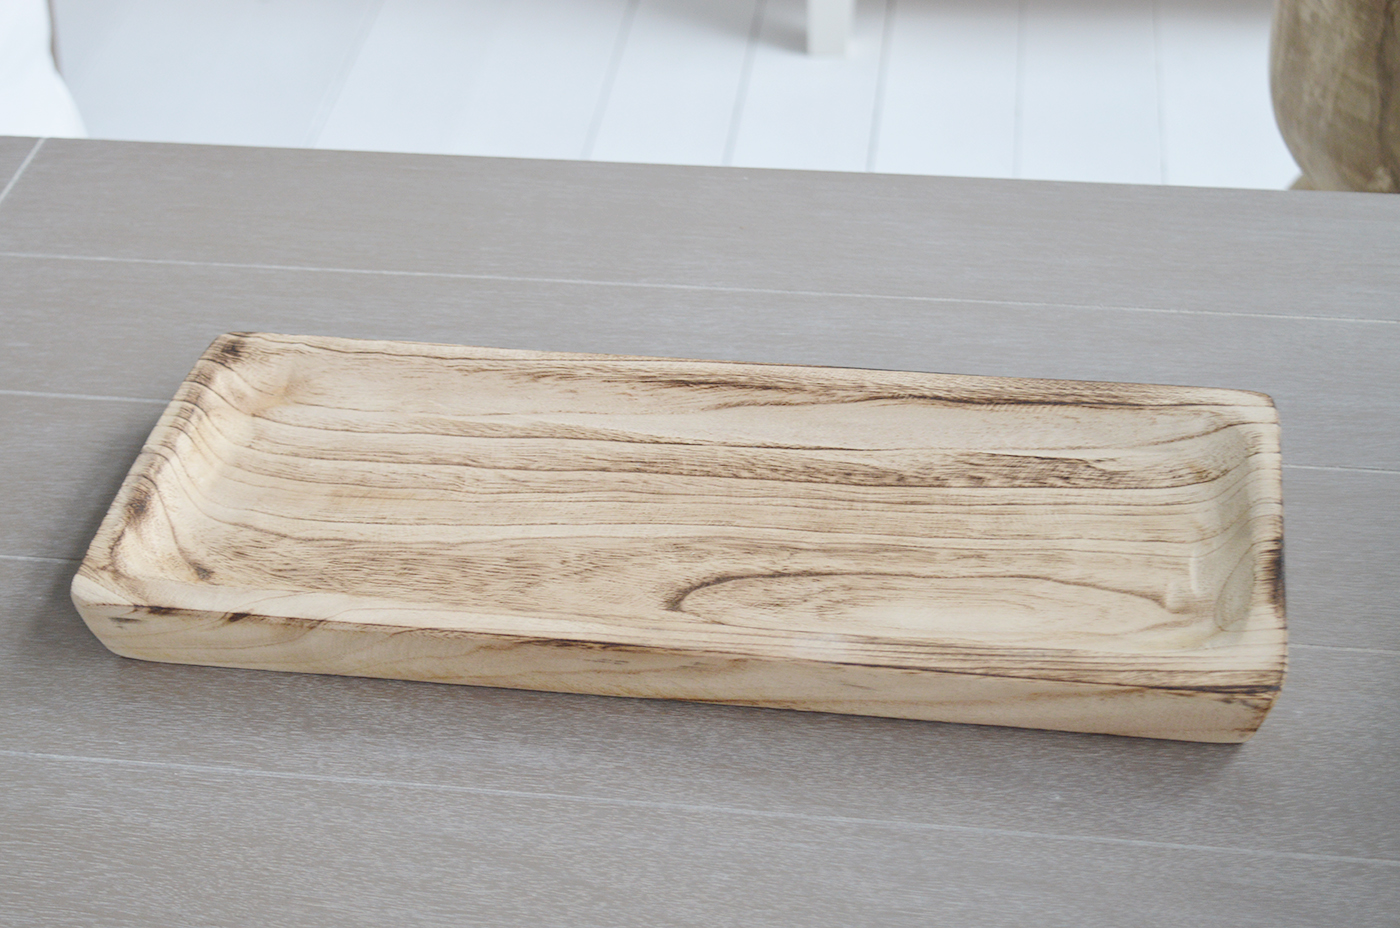 Rectangle wooden display tray for styling consoles and coffee tables on coastal furniture. Chic luxurious Hamptons interiors